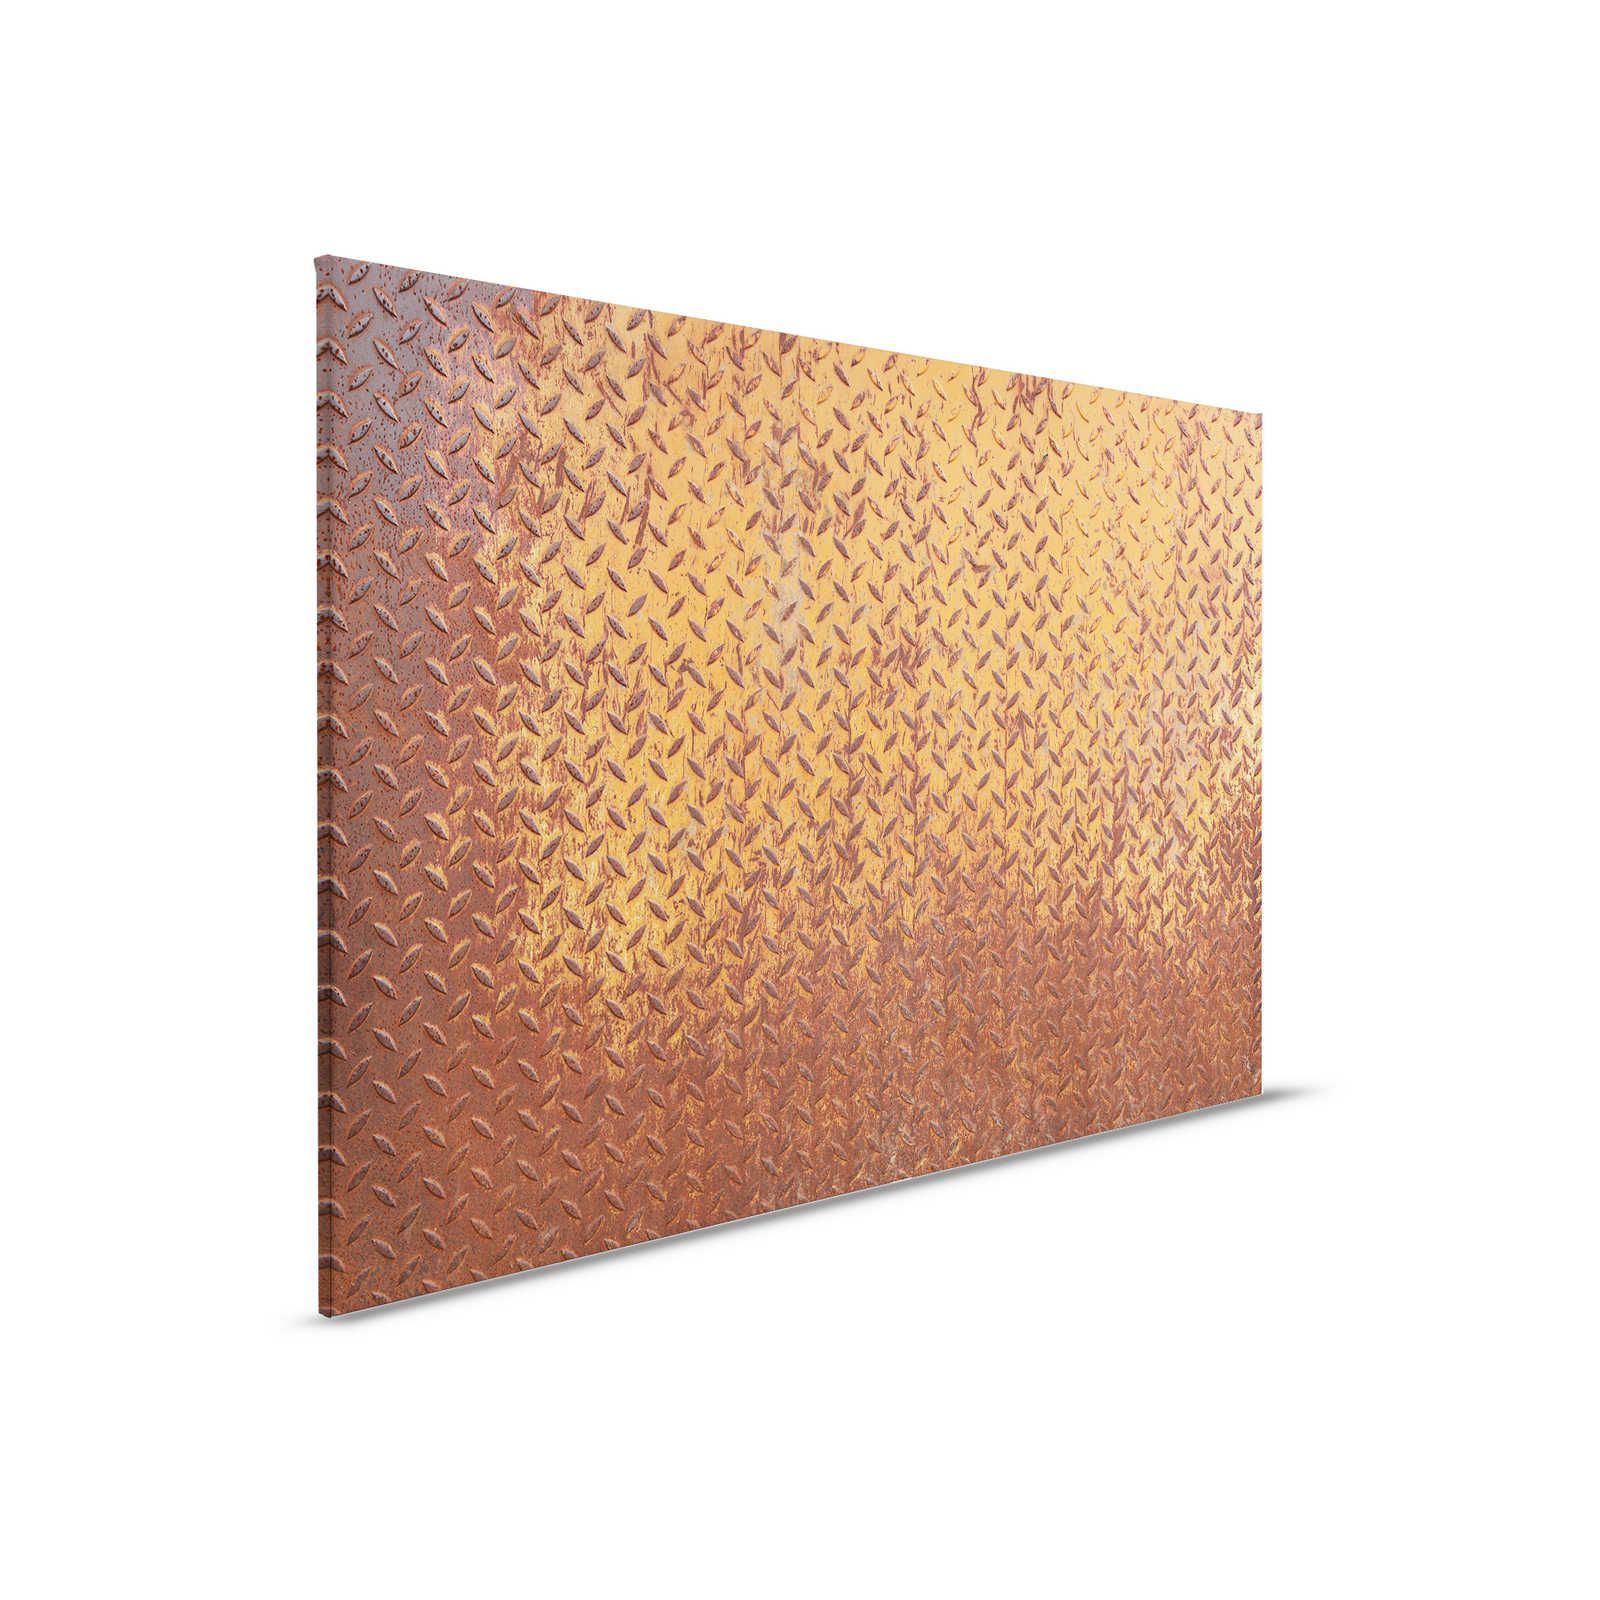         Metal Canvas Painting Steel Plate Rust with Diamond Pattern - 0.90 m x 0.60 m
    